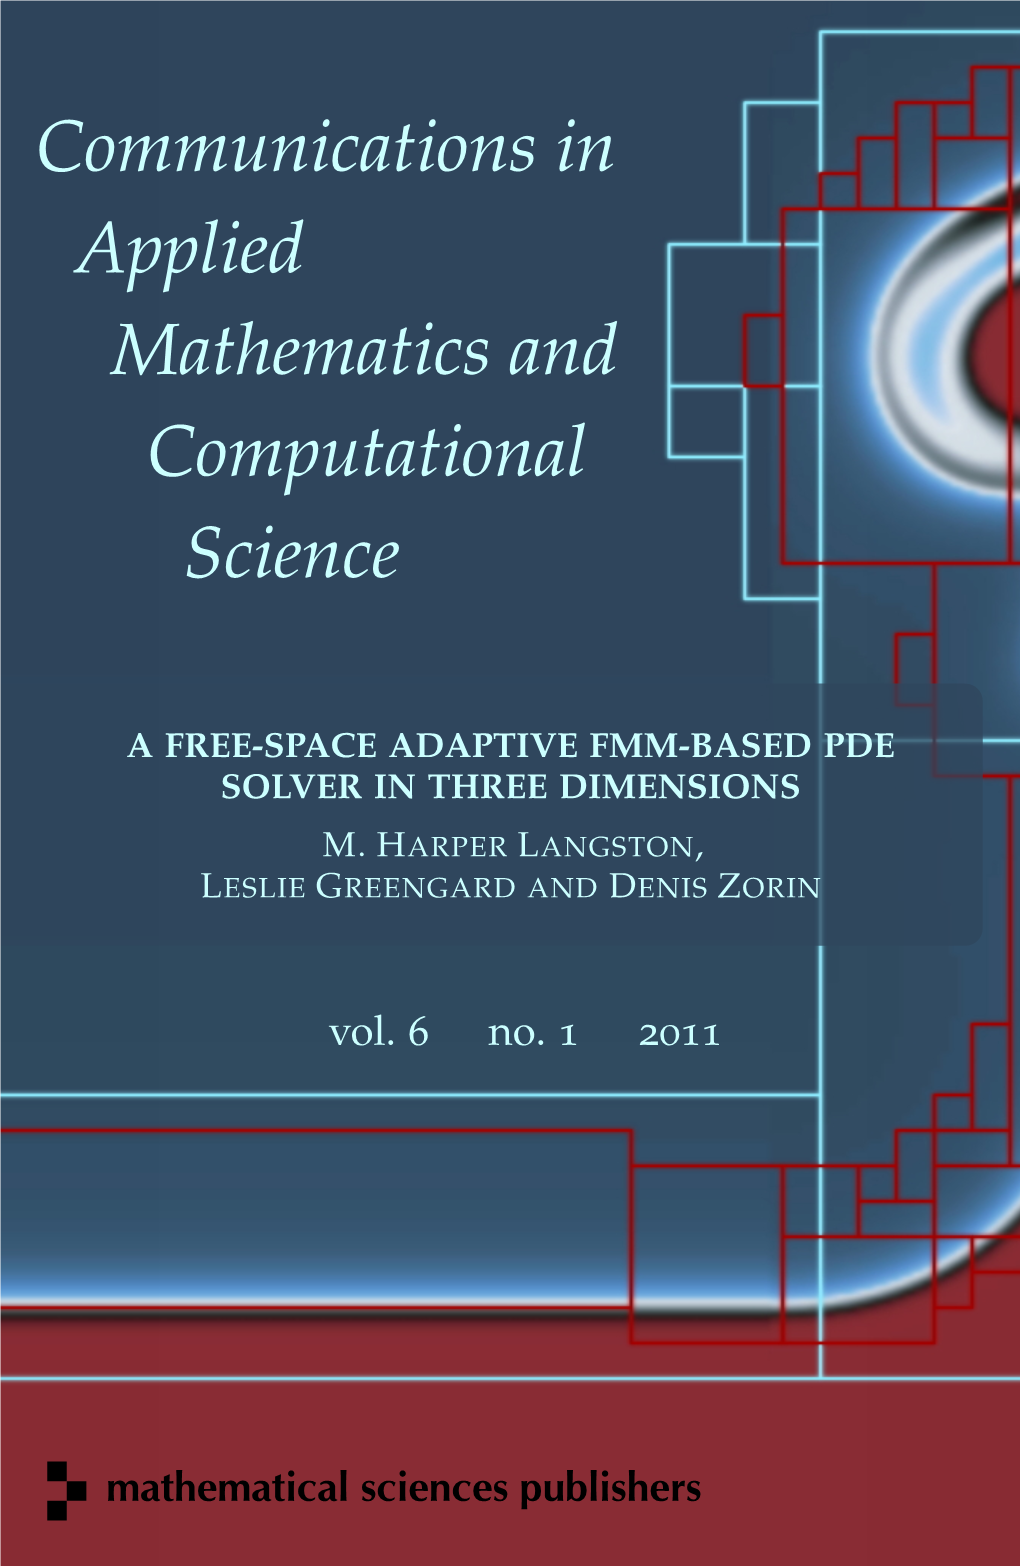 A Free-Space Adaptive Fmm-Based Pde Solver in Three Dimensions M.Harper Langston, Leslie Greengardand Denis Zorin